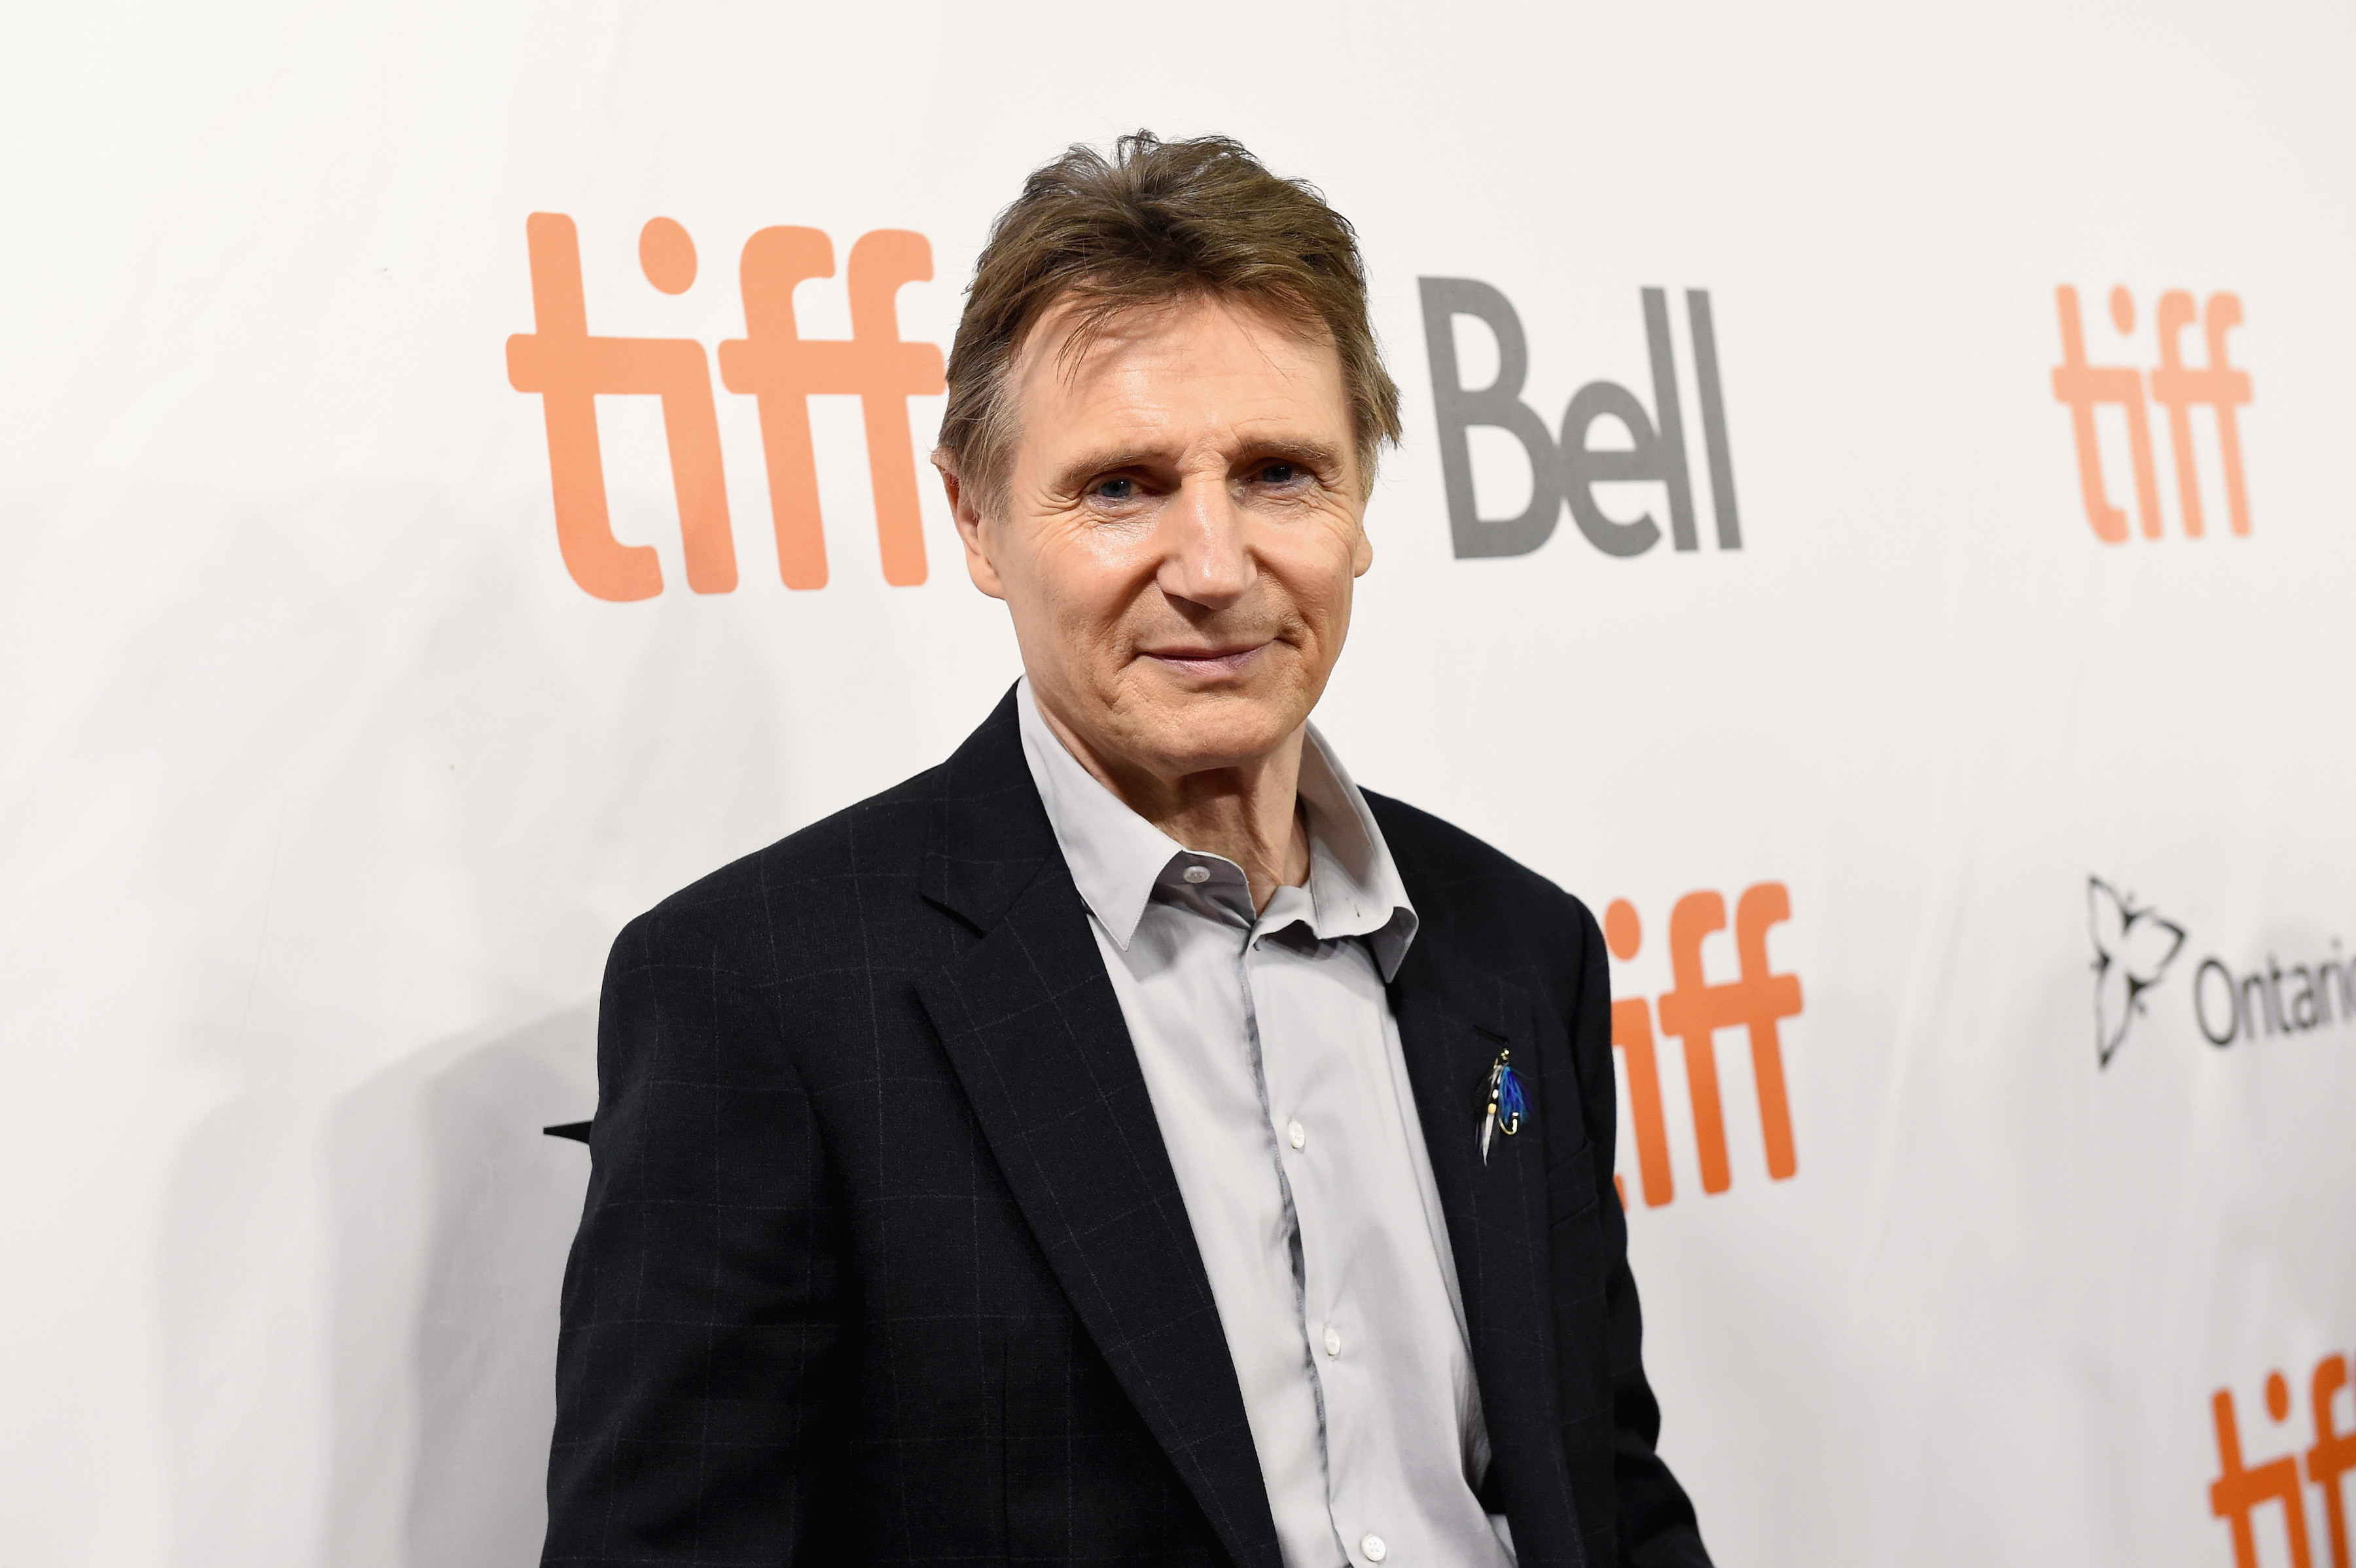 Liam Neeson attends the "Widows" premiere during 2018 Toronto International Film Festival at Roy Thomson Hall on September 8, 2018 in Toronto, Canada. Neeson recently opened up about a connection he had with a horse on the set of "The Ballad of Buster Scruggs." (Photo by Kevin Winter/SHJ2018/Getty Images for TIFF)